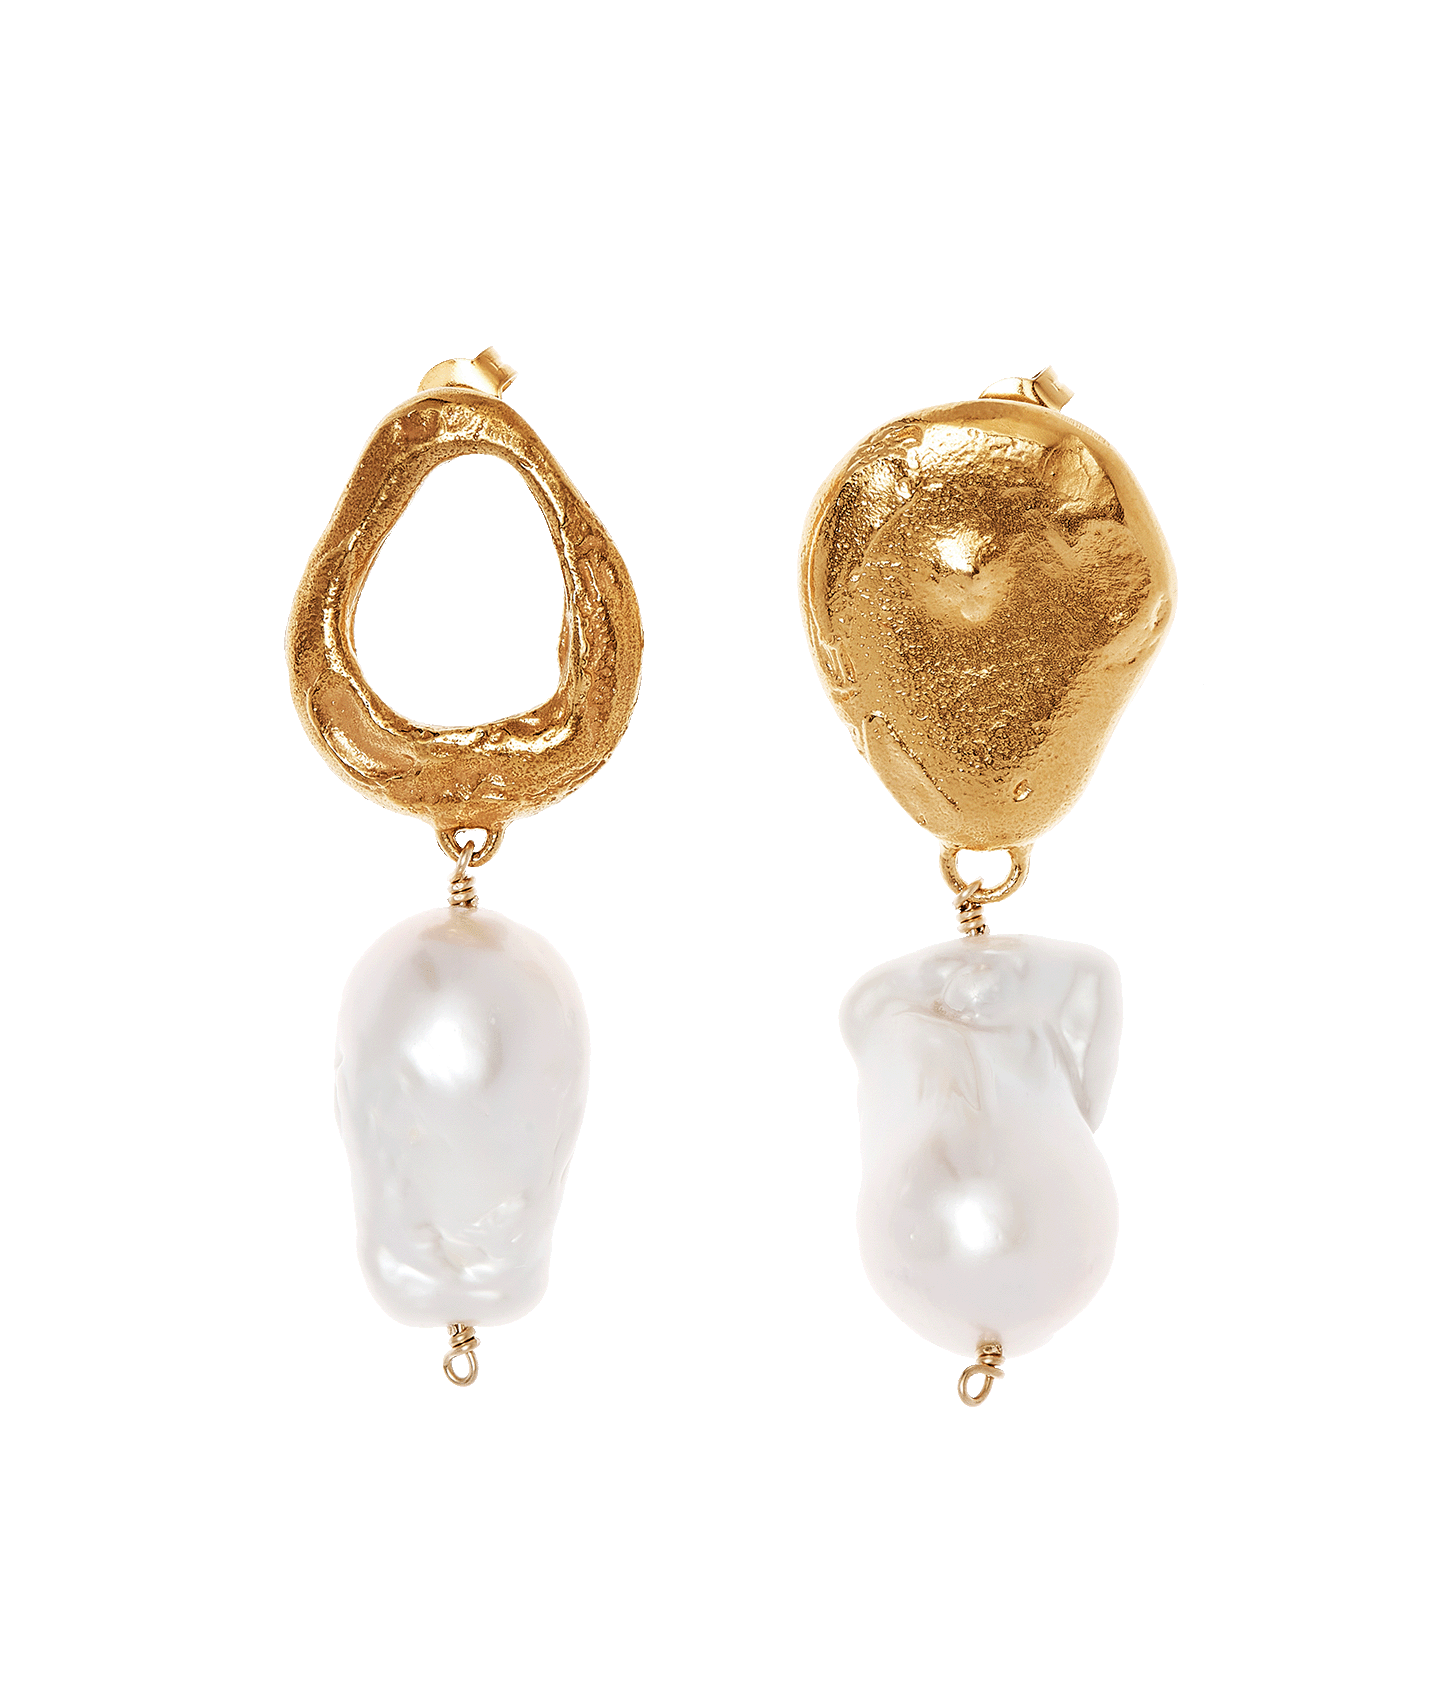 The 2023 Pearl Jewelry TZR Editors Have On Their Wishlists